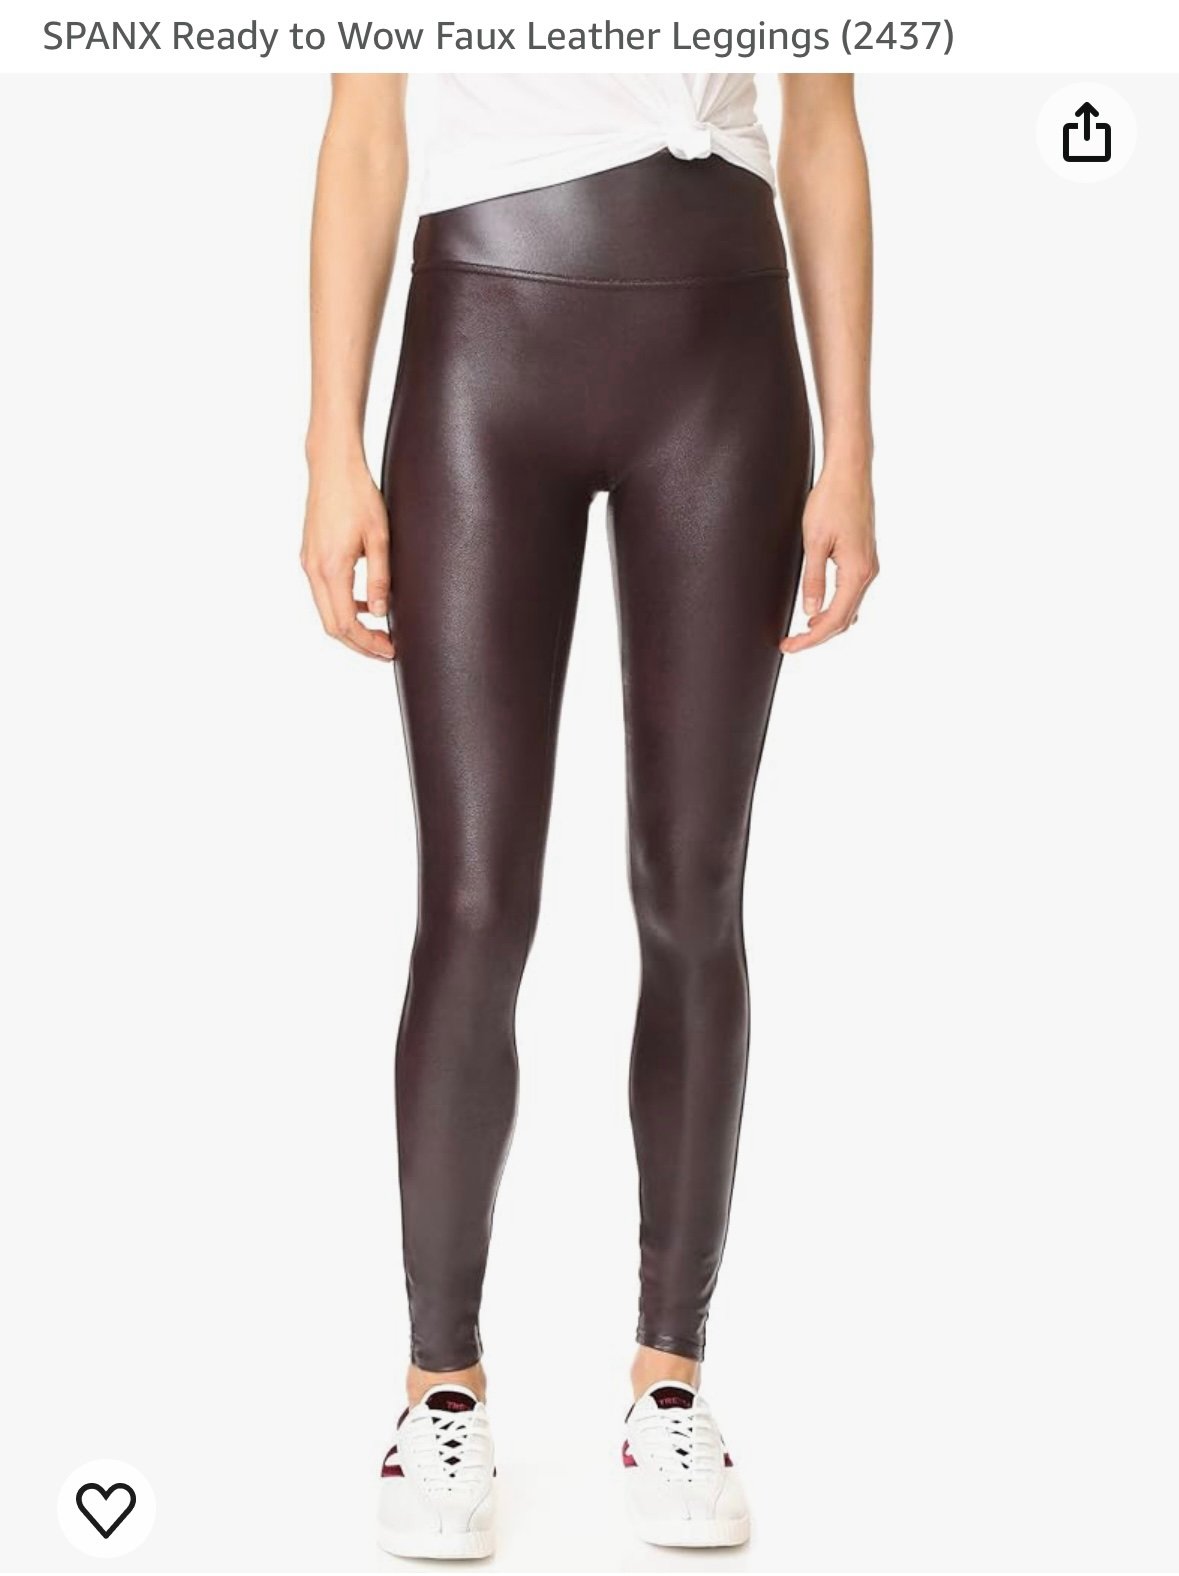 Stylish SPANX READY-TO-WOW FAUX LEATHER LEGGINGS WOMENS